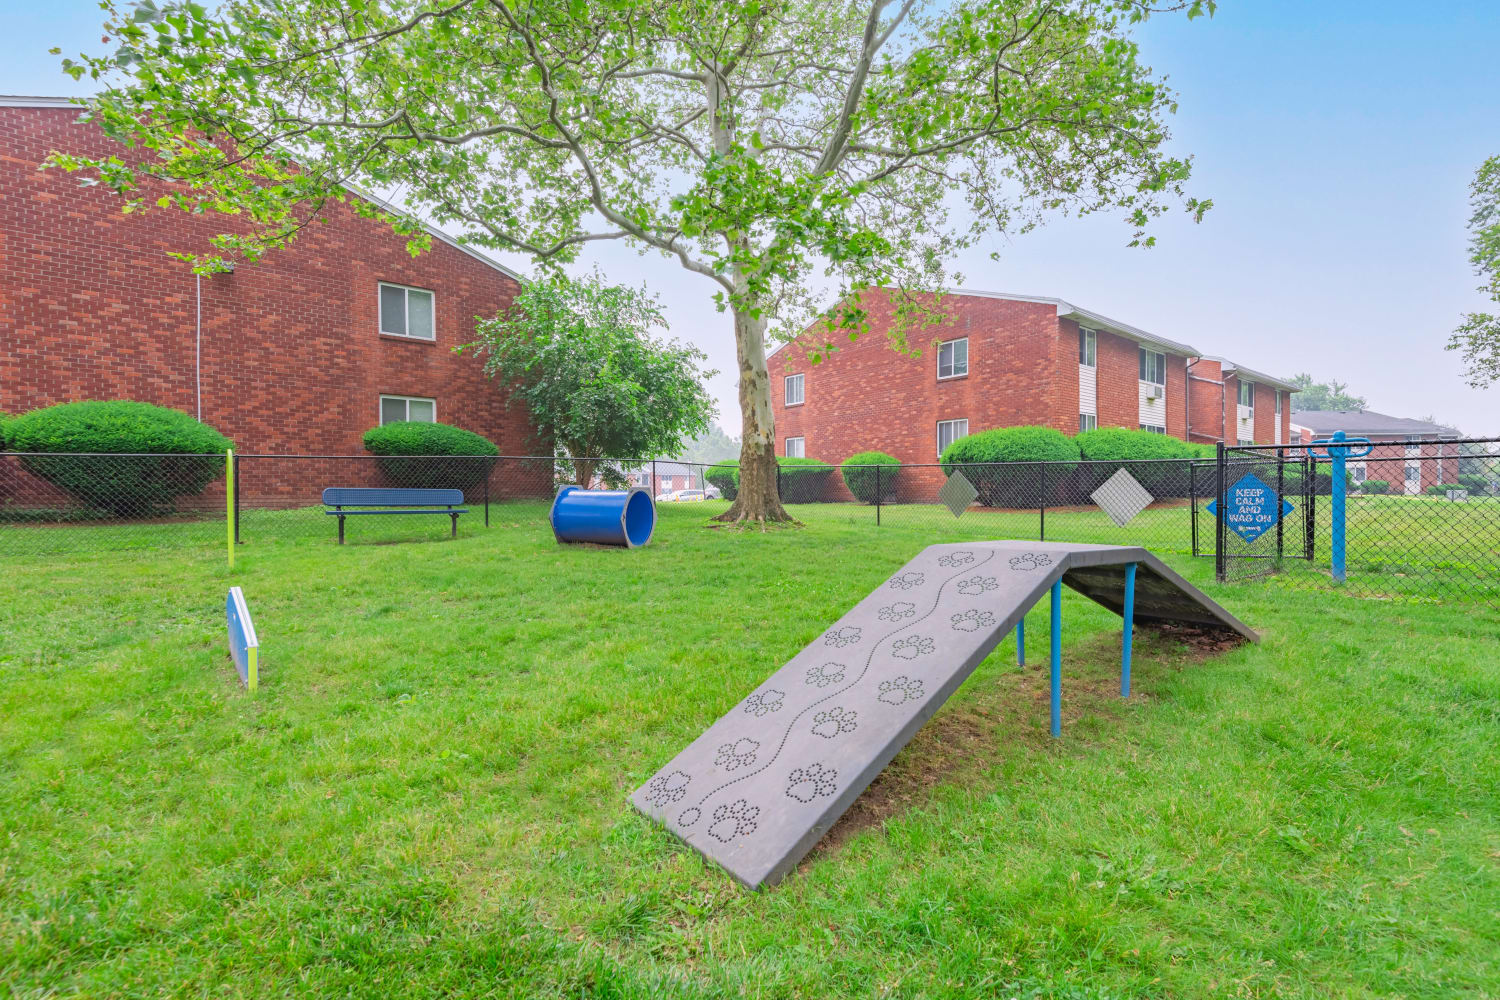 Dog park at King's Court Manor Apartments in Rochester, New York